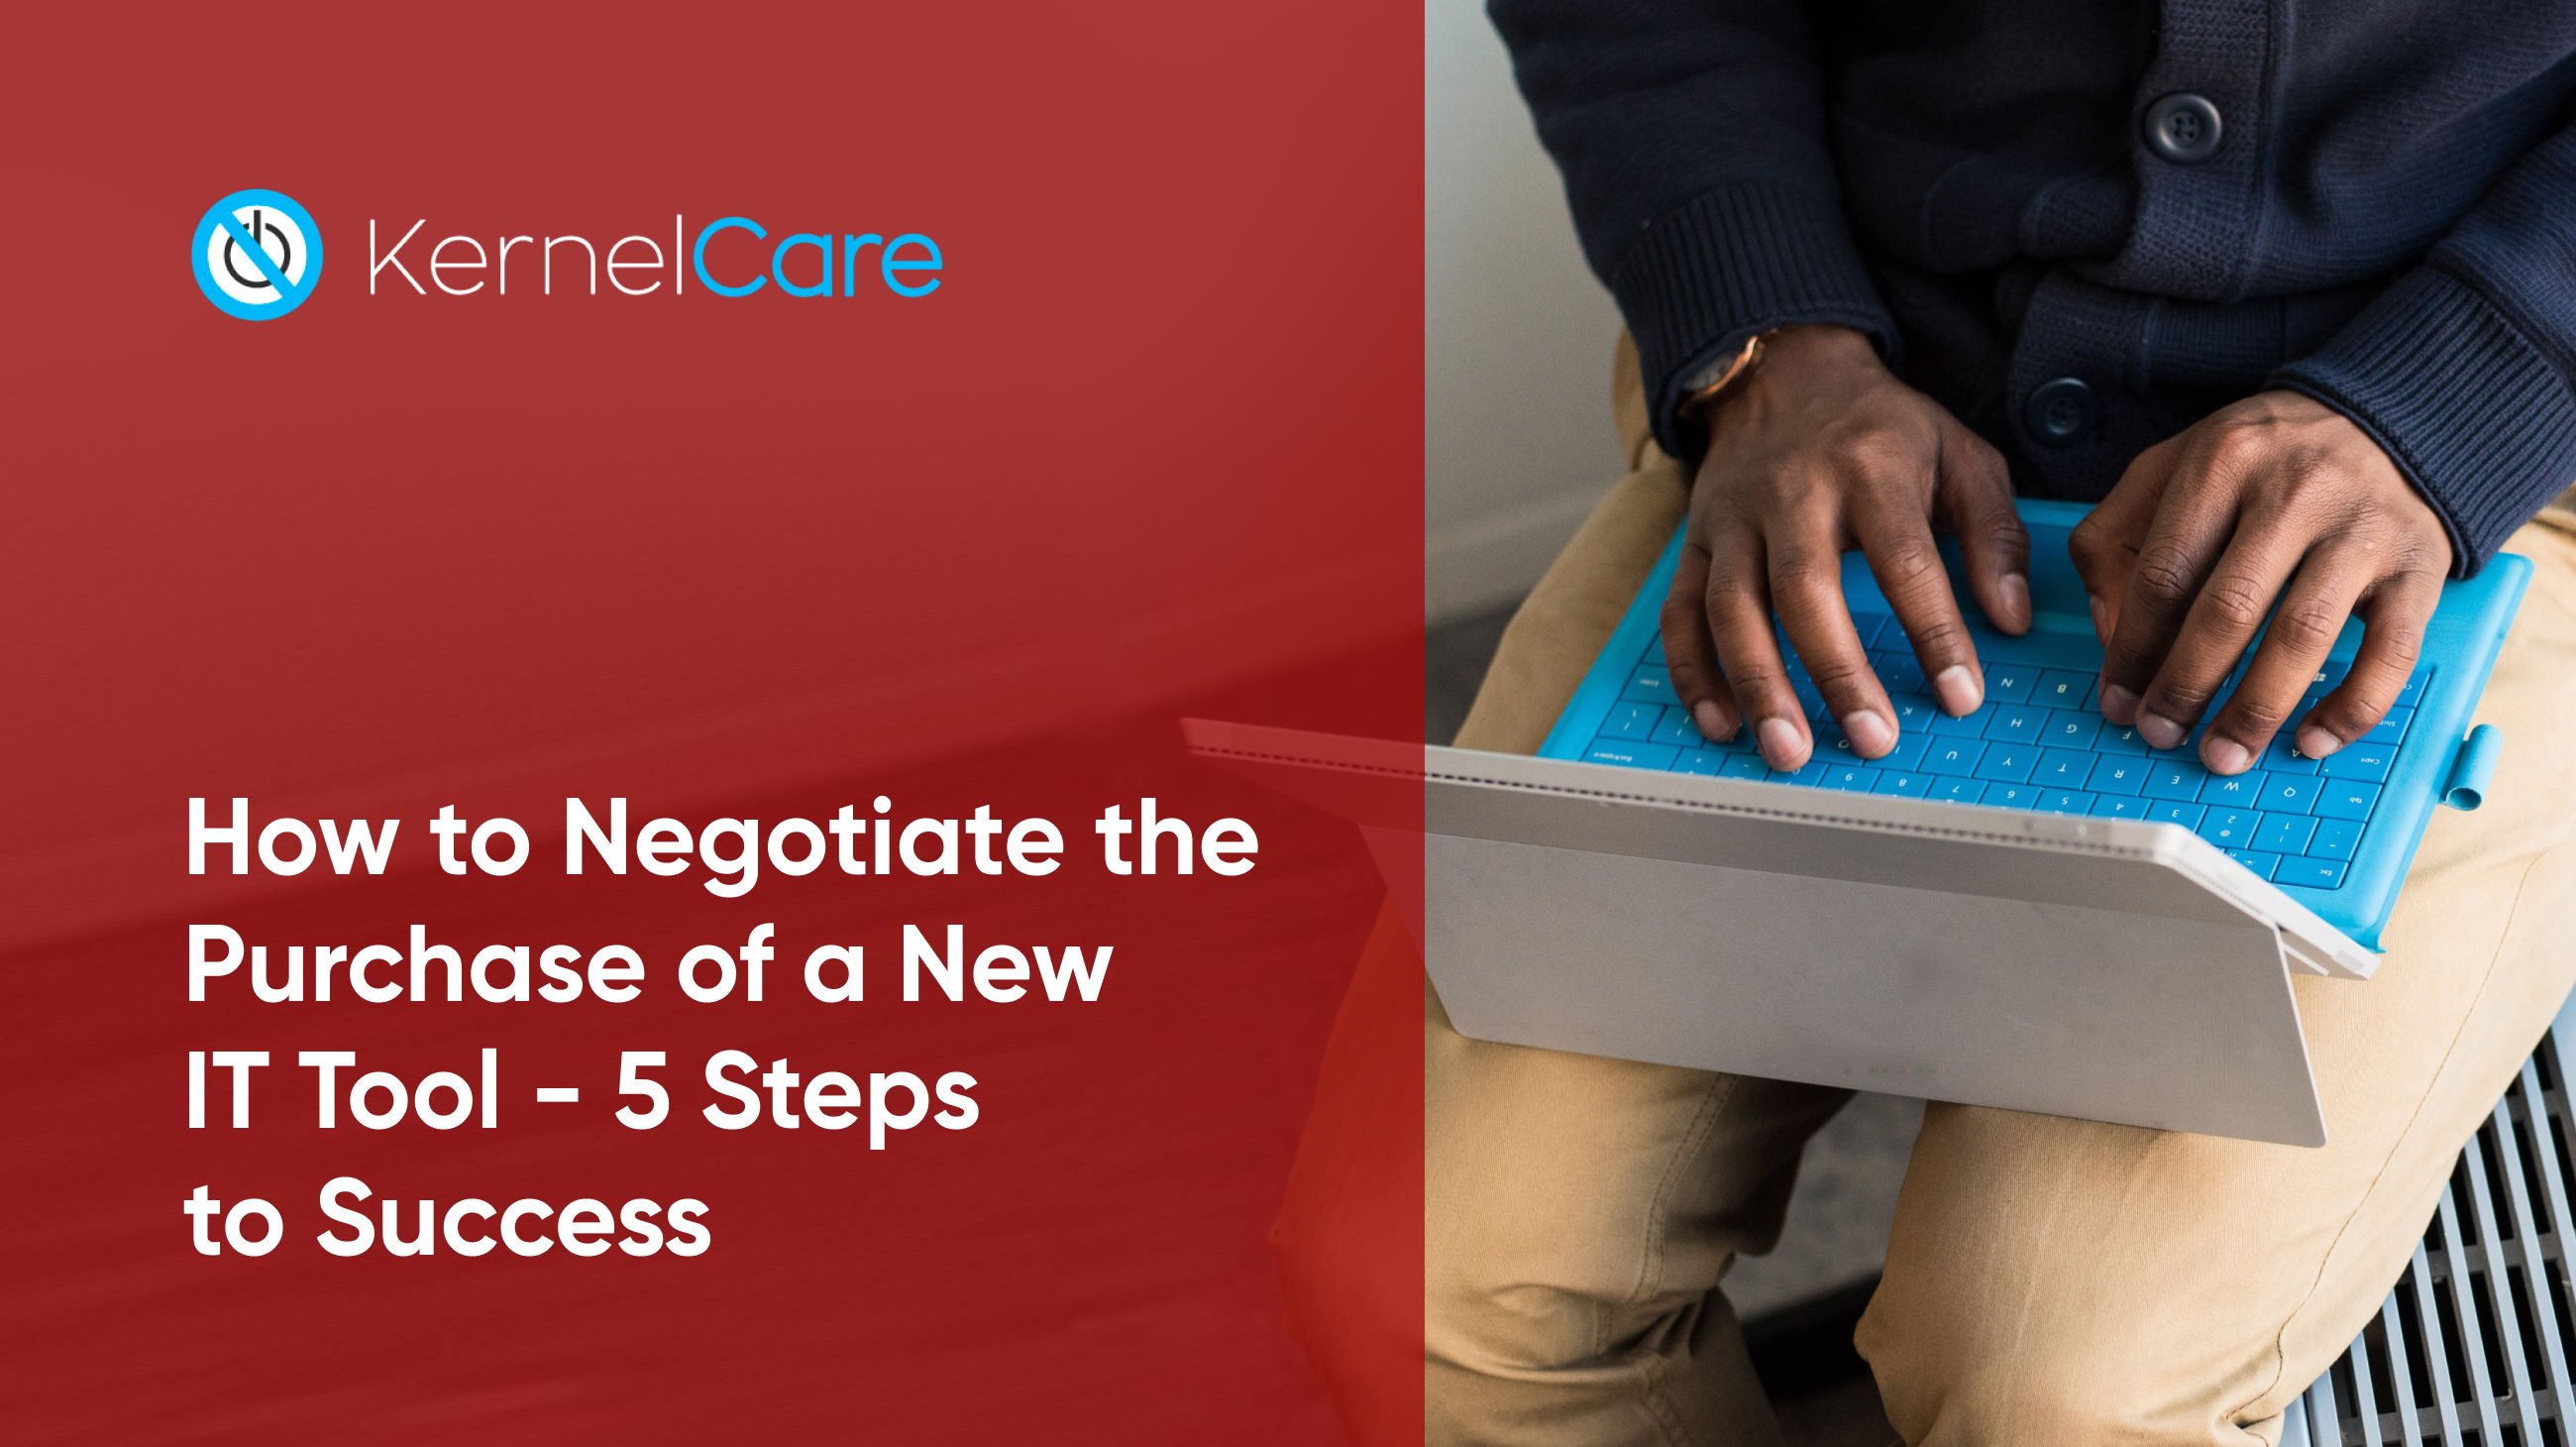 How to Negotiate the Purchase of a New IT Tool - 5 Steps to Success